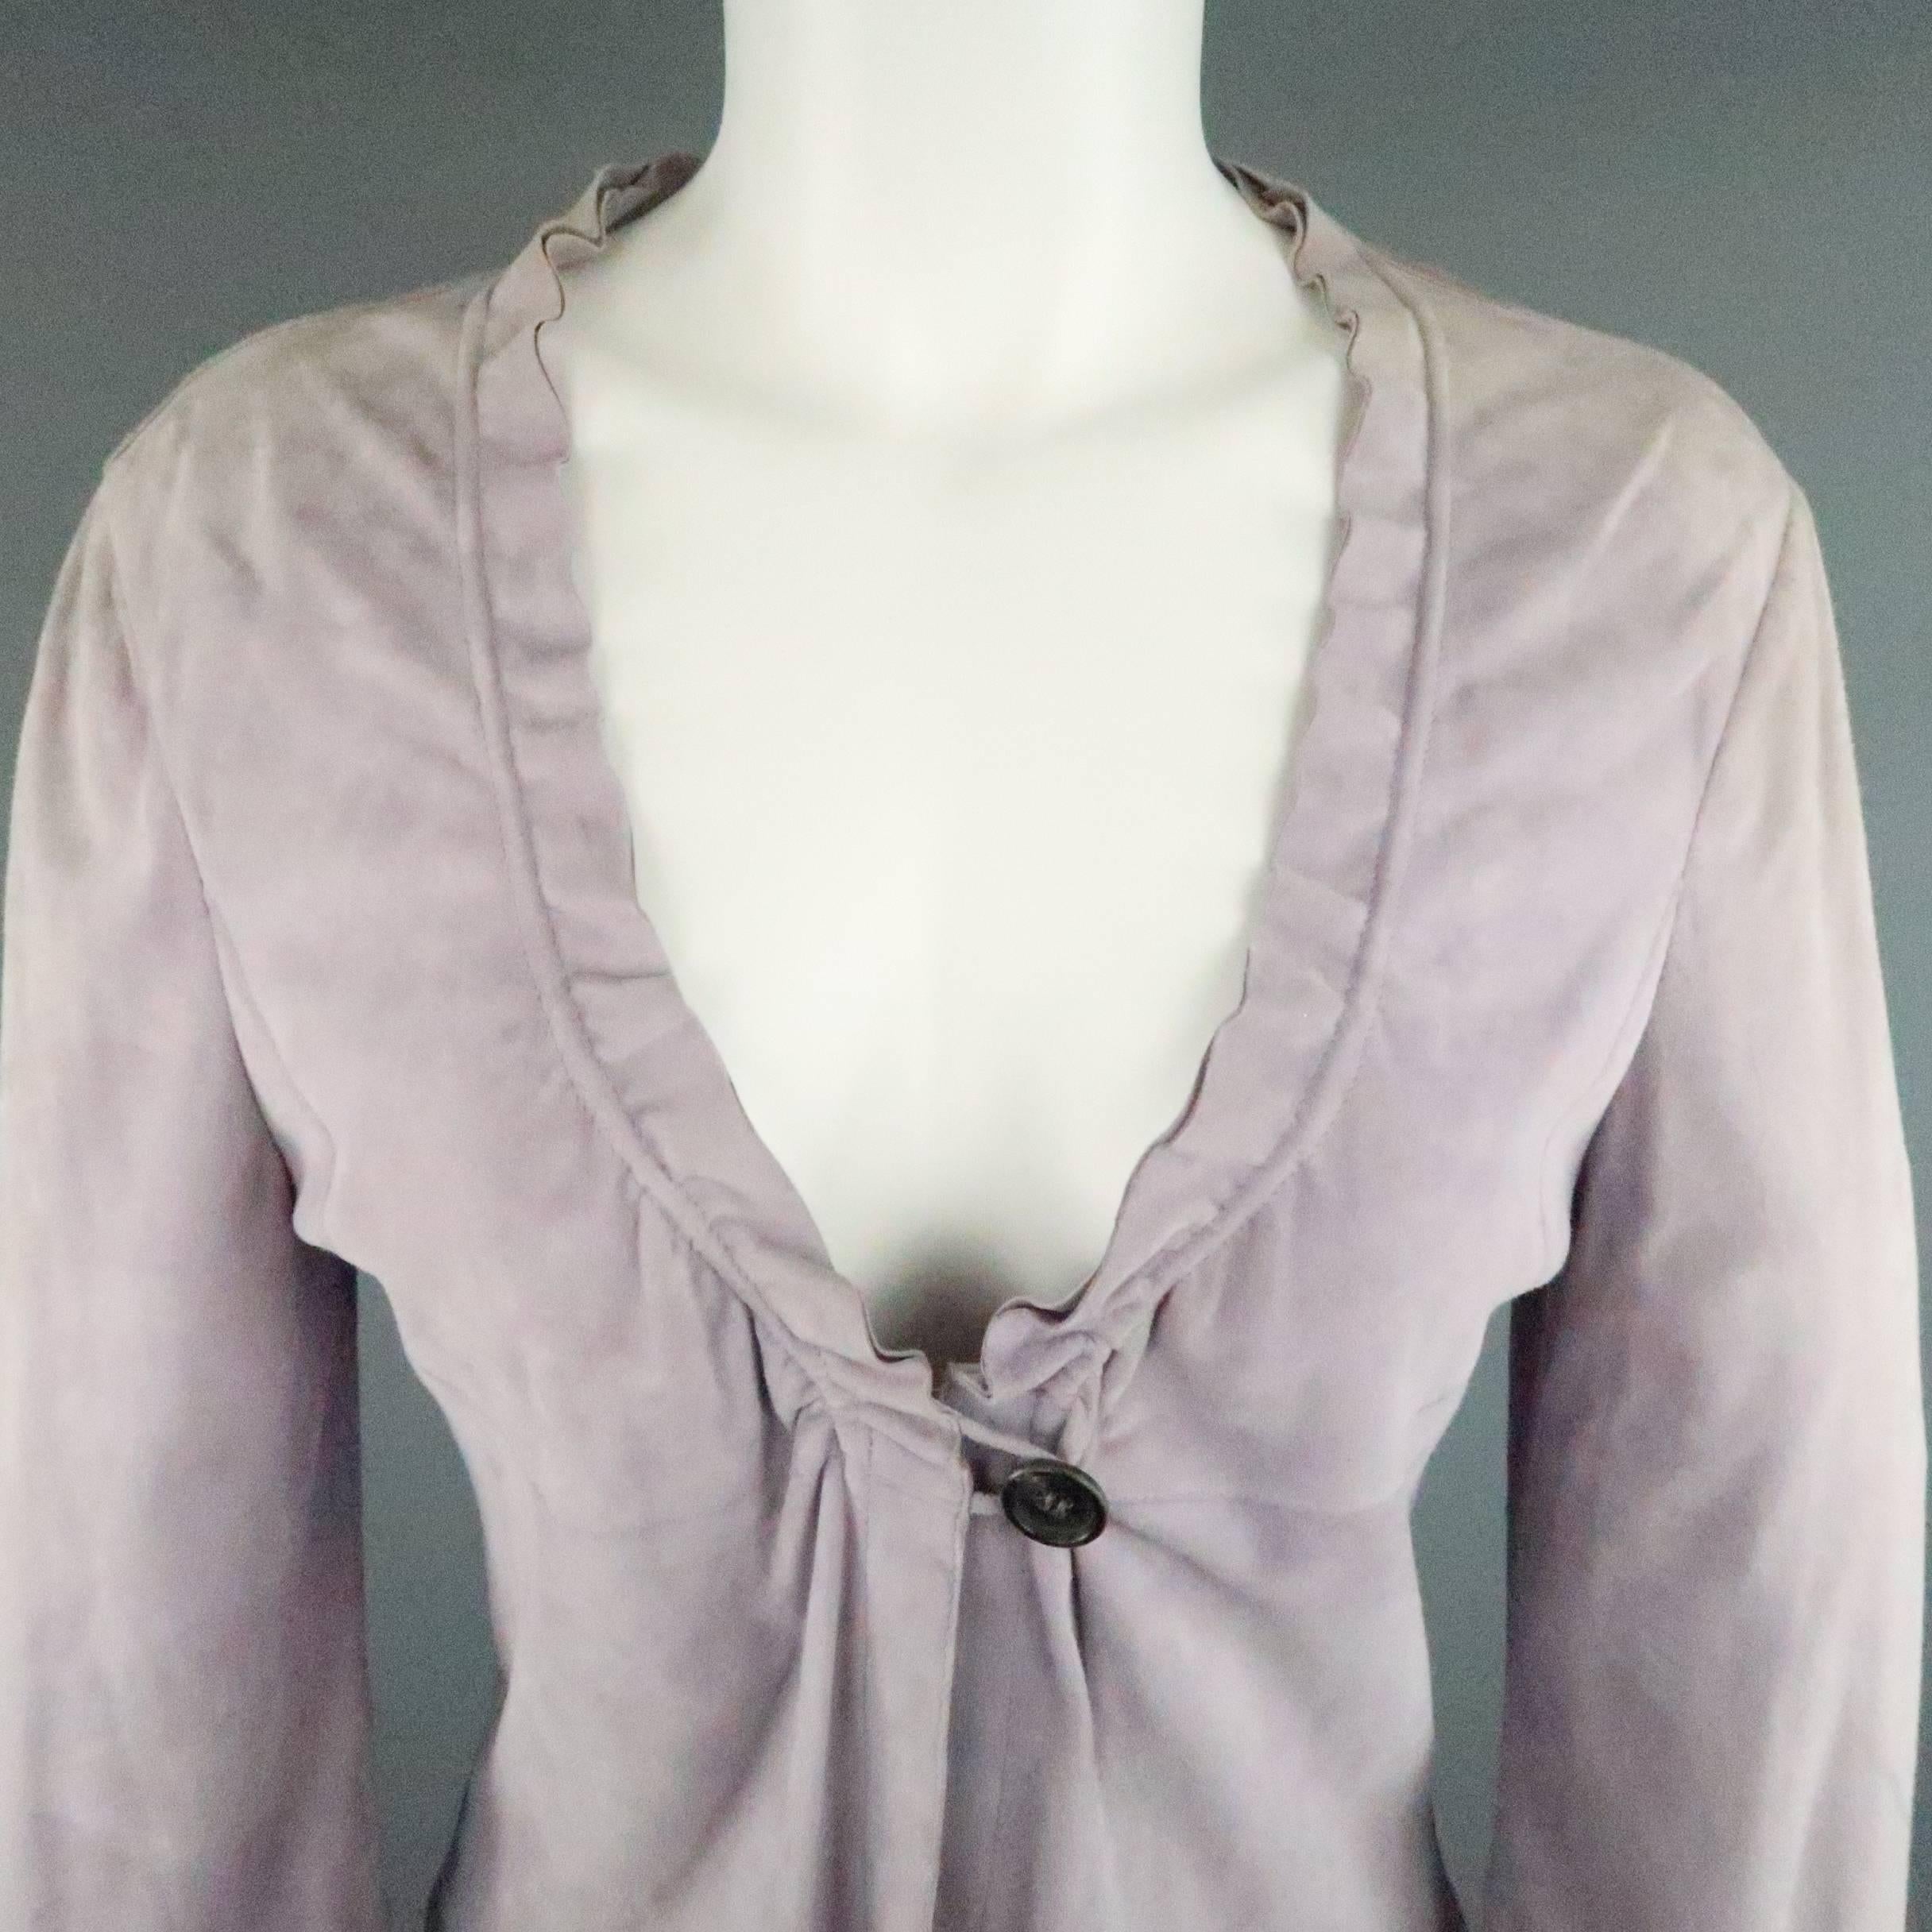 GIORGIO ARMANI cardigan jacket comes in a light weight lavender nubuck suede leather and features a single button closure, empire waist with underbust seam, and ruffled trim. Discoloration throughout suede. As-Is. Made In Italy.
 
Fair Pre-Owned